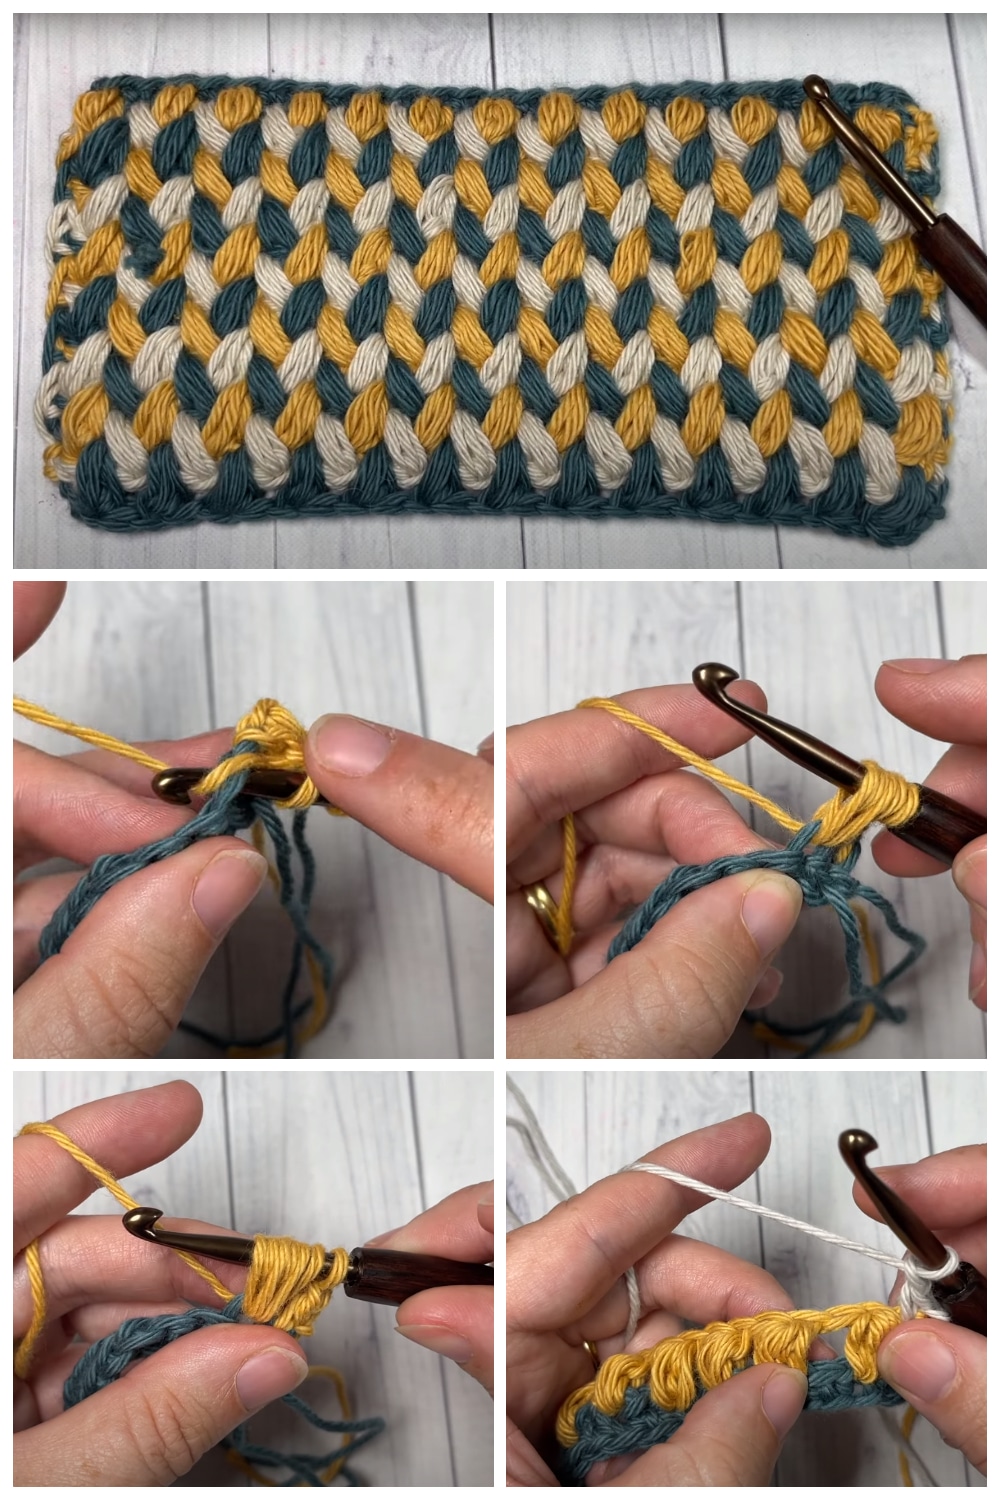 This Crochet Zigzag Spike Puff Stitch is easy to follow. It is a great project for beginners because it doesn’t require any pattern reading skills and it’s an easy repetitive pattern. If you are looking for a quick, fun way to make something special for someone in your family or life, it would be perfect project.